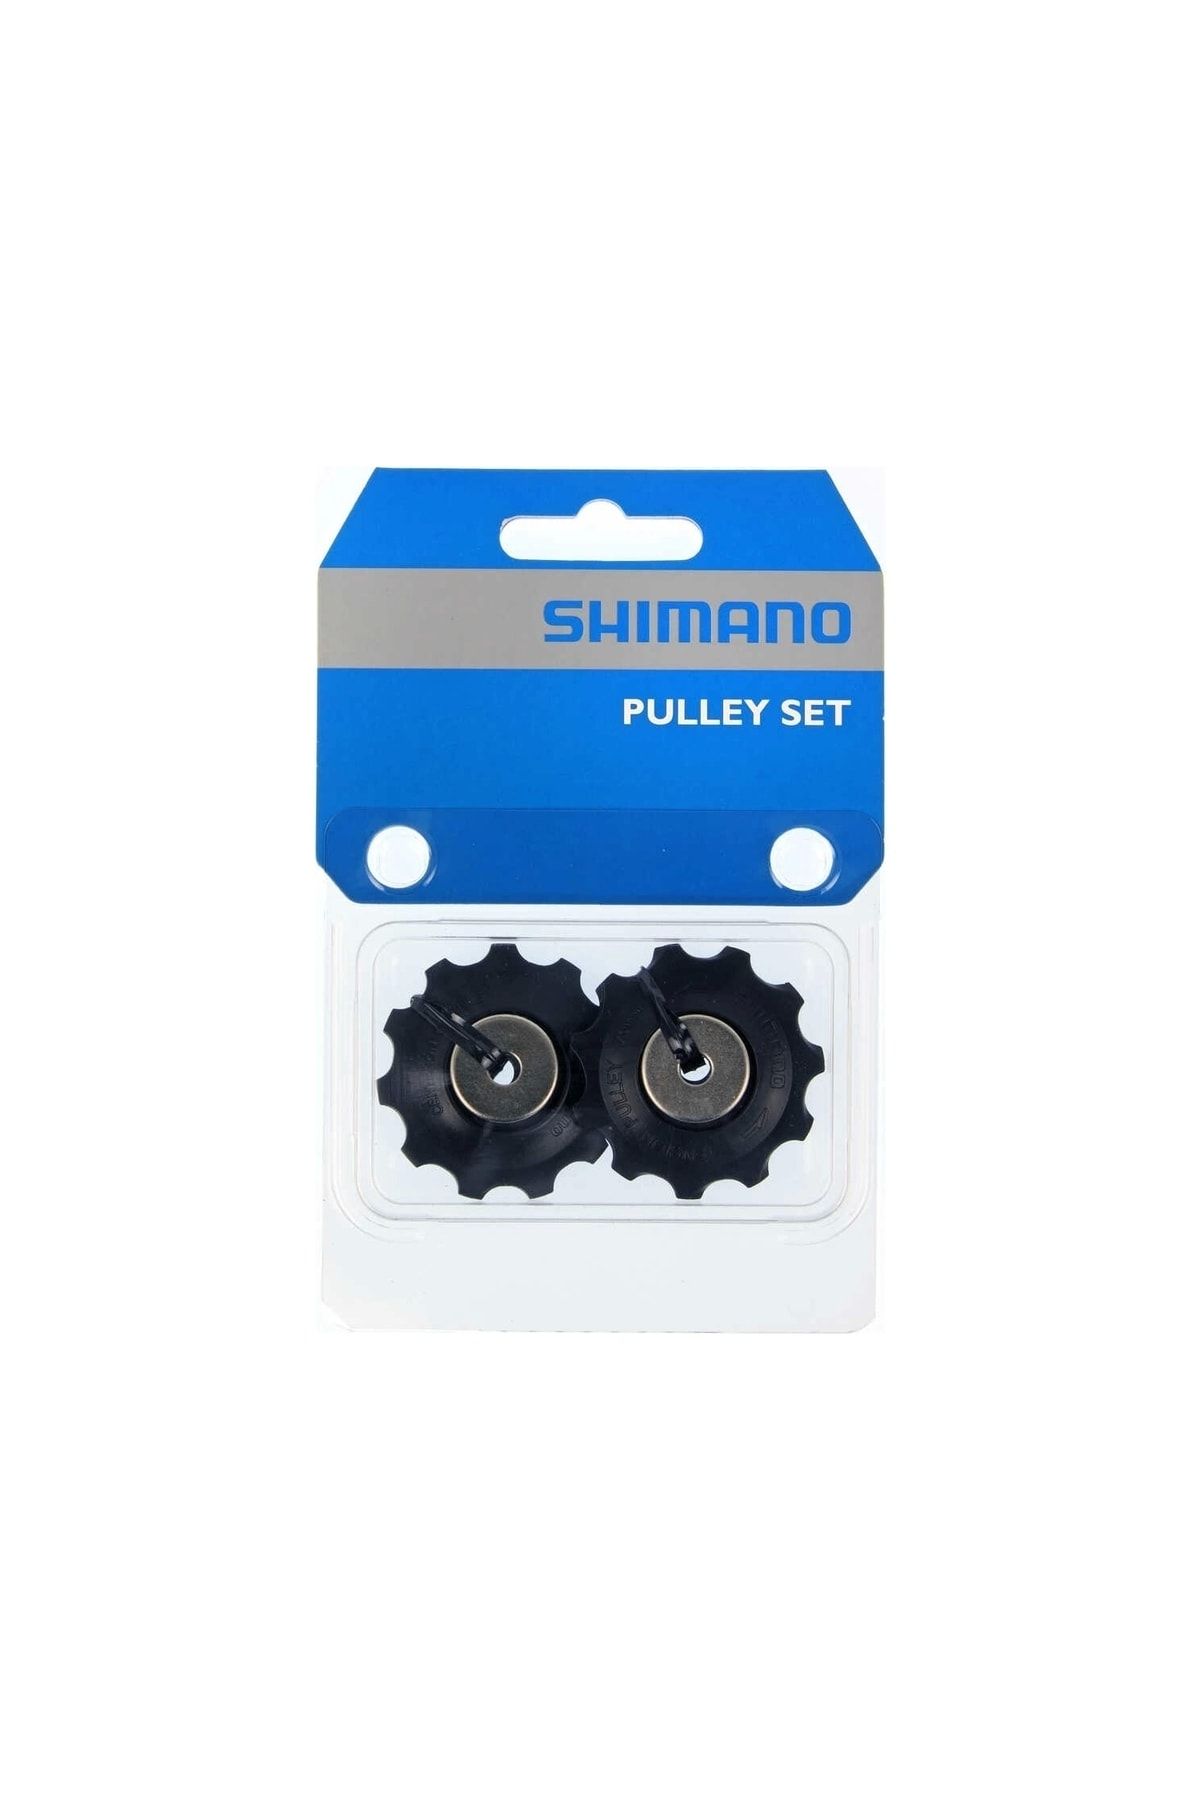 shimano Tension/Guide Pulley Set Rd-5700